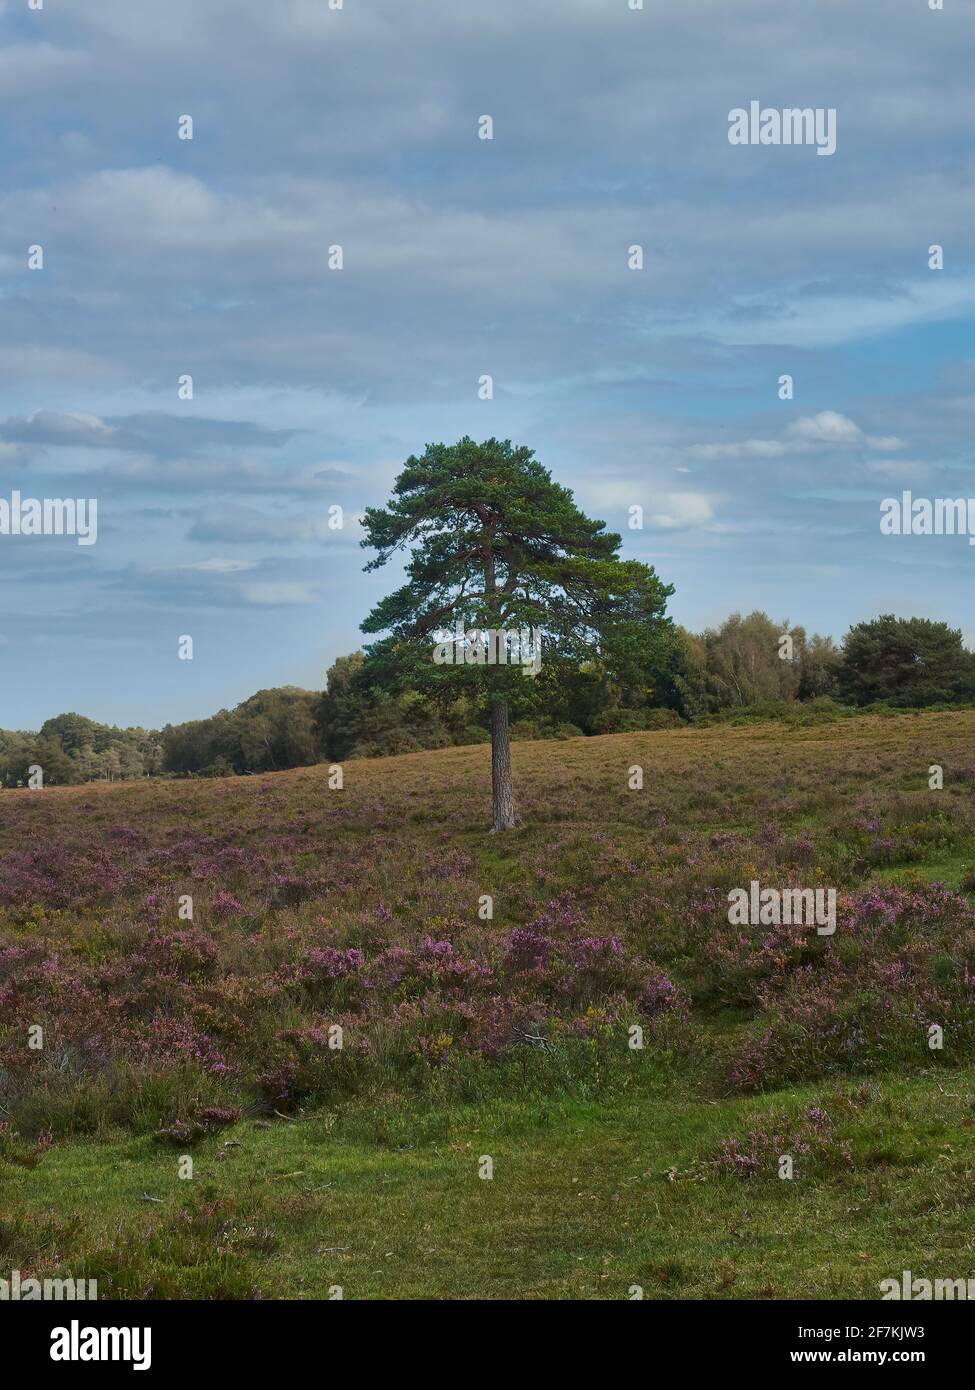 A tall tree isolated in an expanse of heather blossomed heathland ahead the trees of the forest edge. Autumn colours are emerging in the foliage. Stock Photo